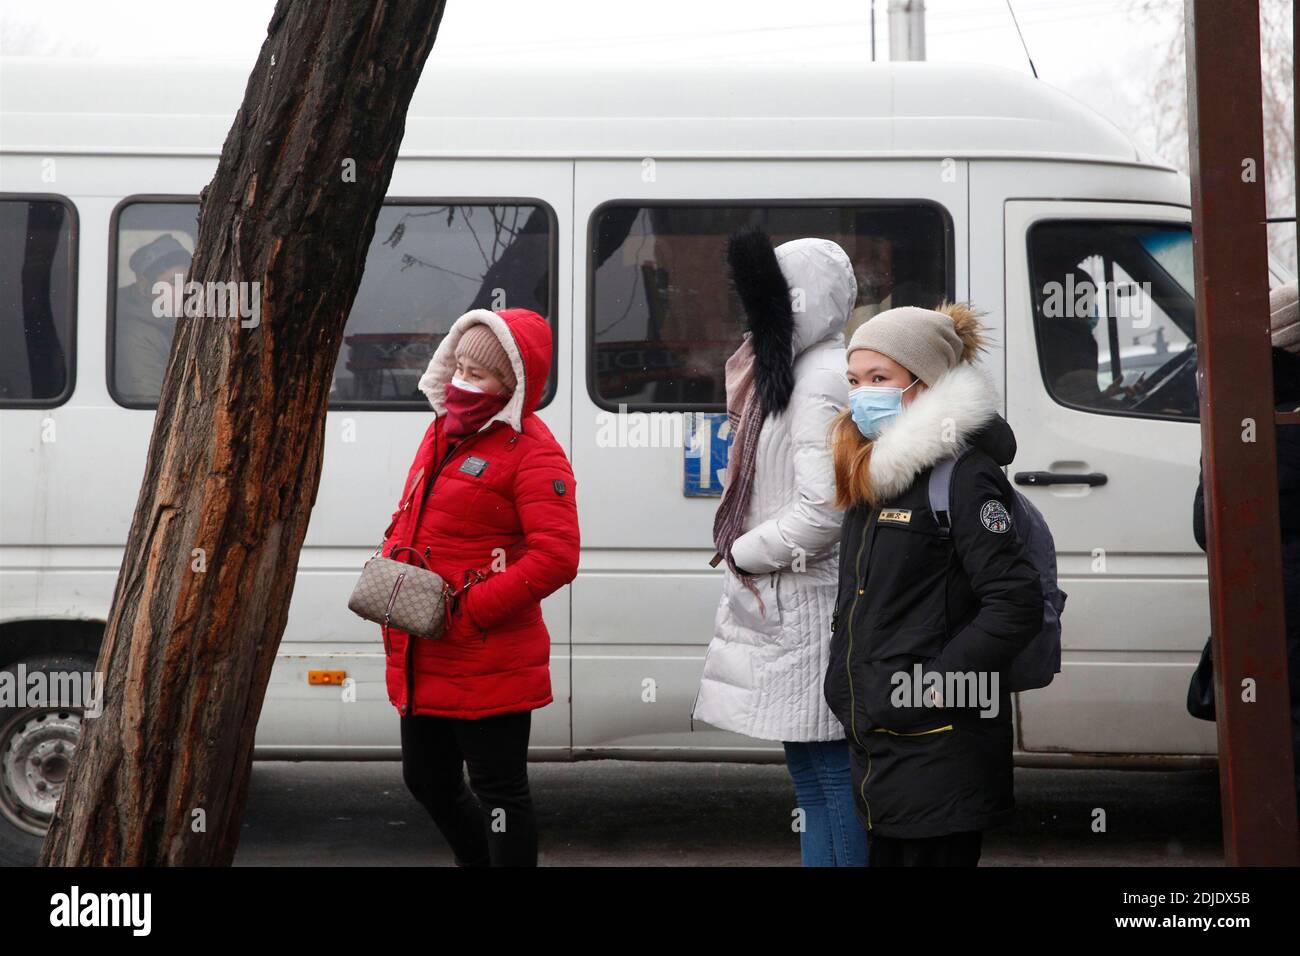 Bishkek, Kyrgyzstan. 14th Dec, 2020. Pedestrians wearing face masks wait for bus in Bishkek, Kyrgyzstan, Dec. 14, 2020. Kyrgyzstan's COVID-19 cases reached 77,674 on Monday as 318 new cases were registered across the country over the past 24 hours. Credit: Roman/Xinhua/Alamy Live News Stock Photo